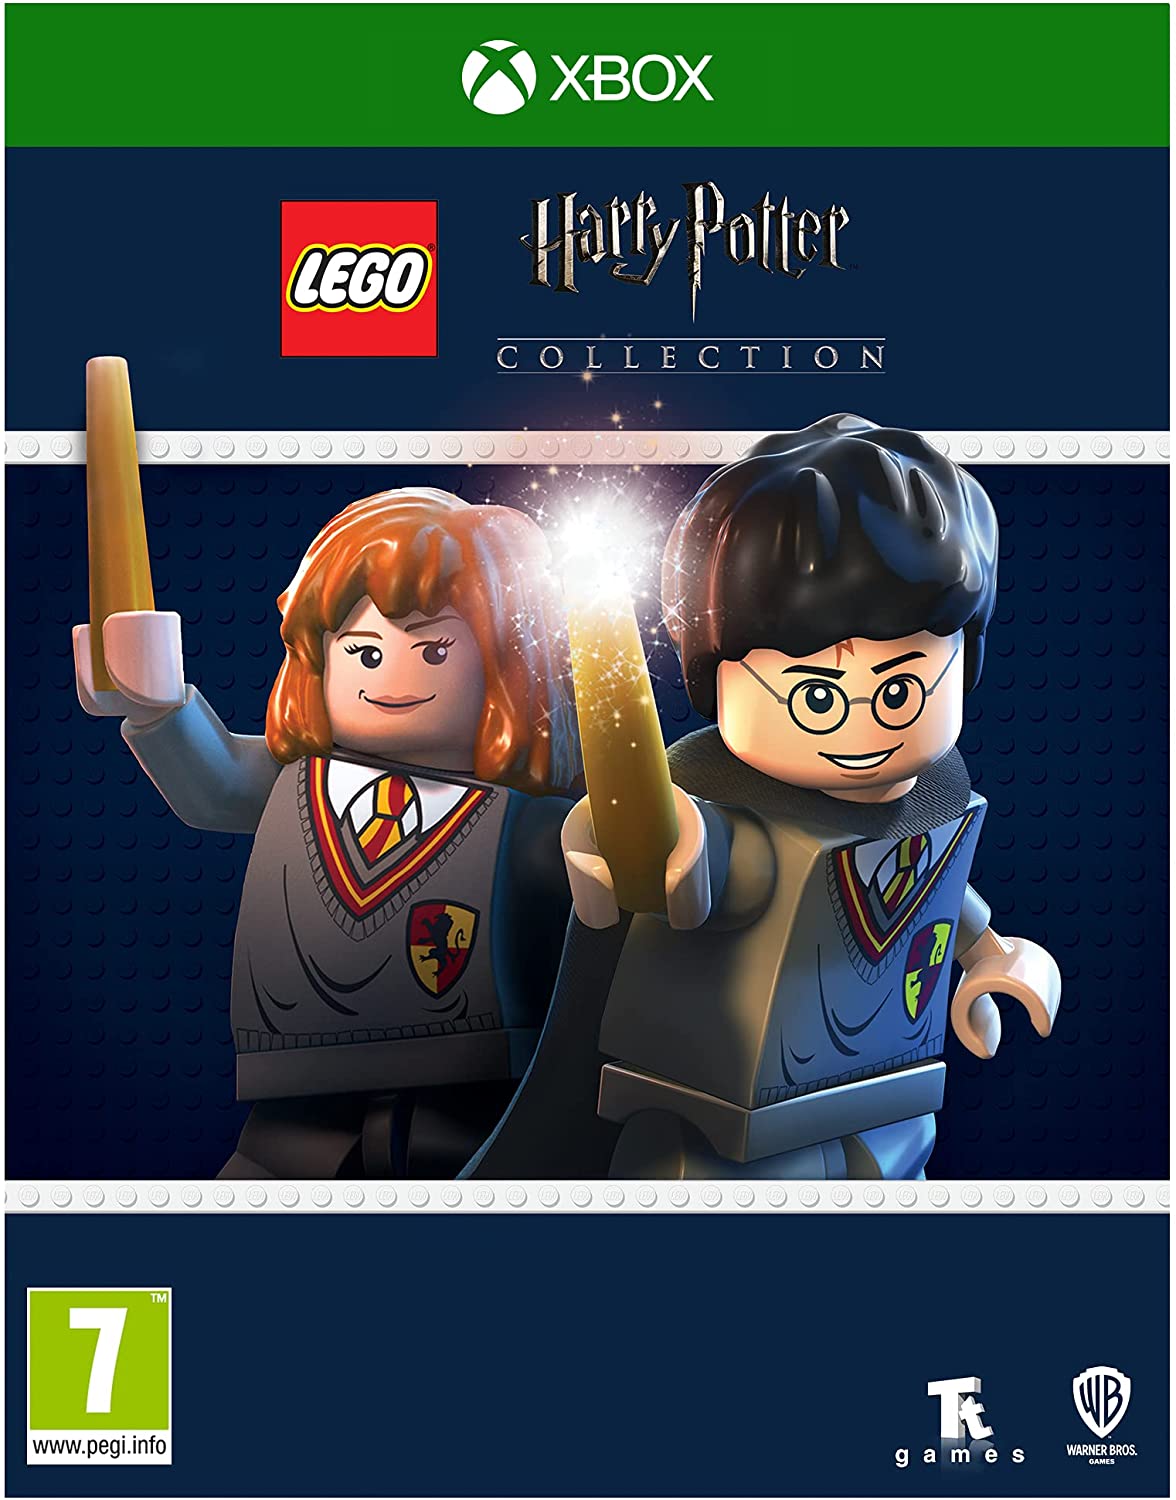 Buy cheap LEGO Harry Potter: Years 1-4 cd key - lowest price